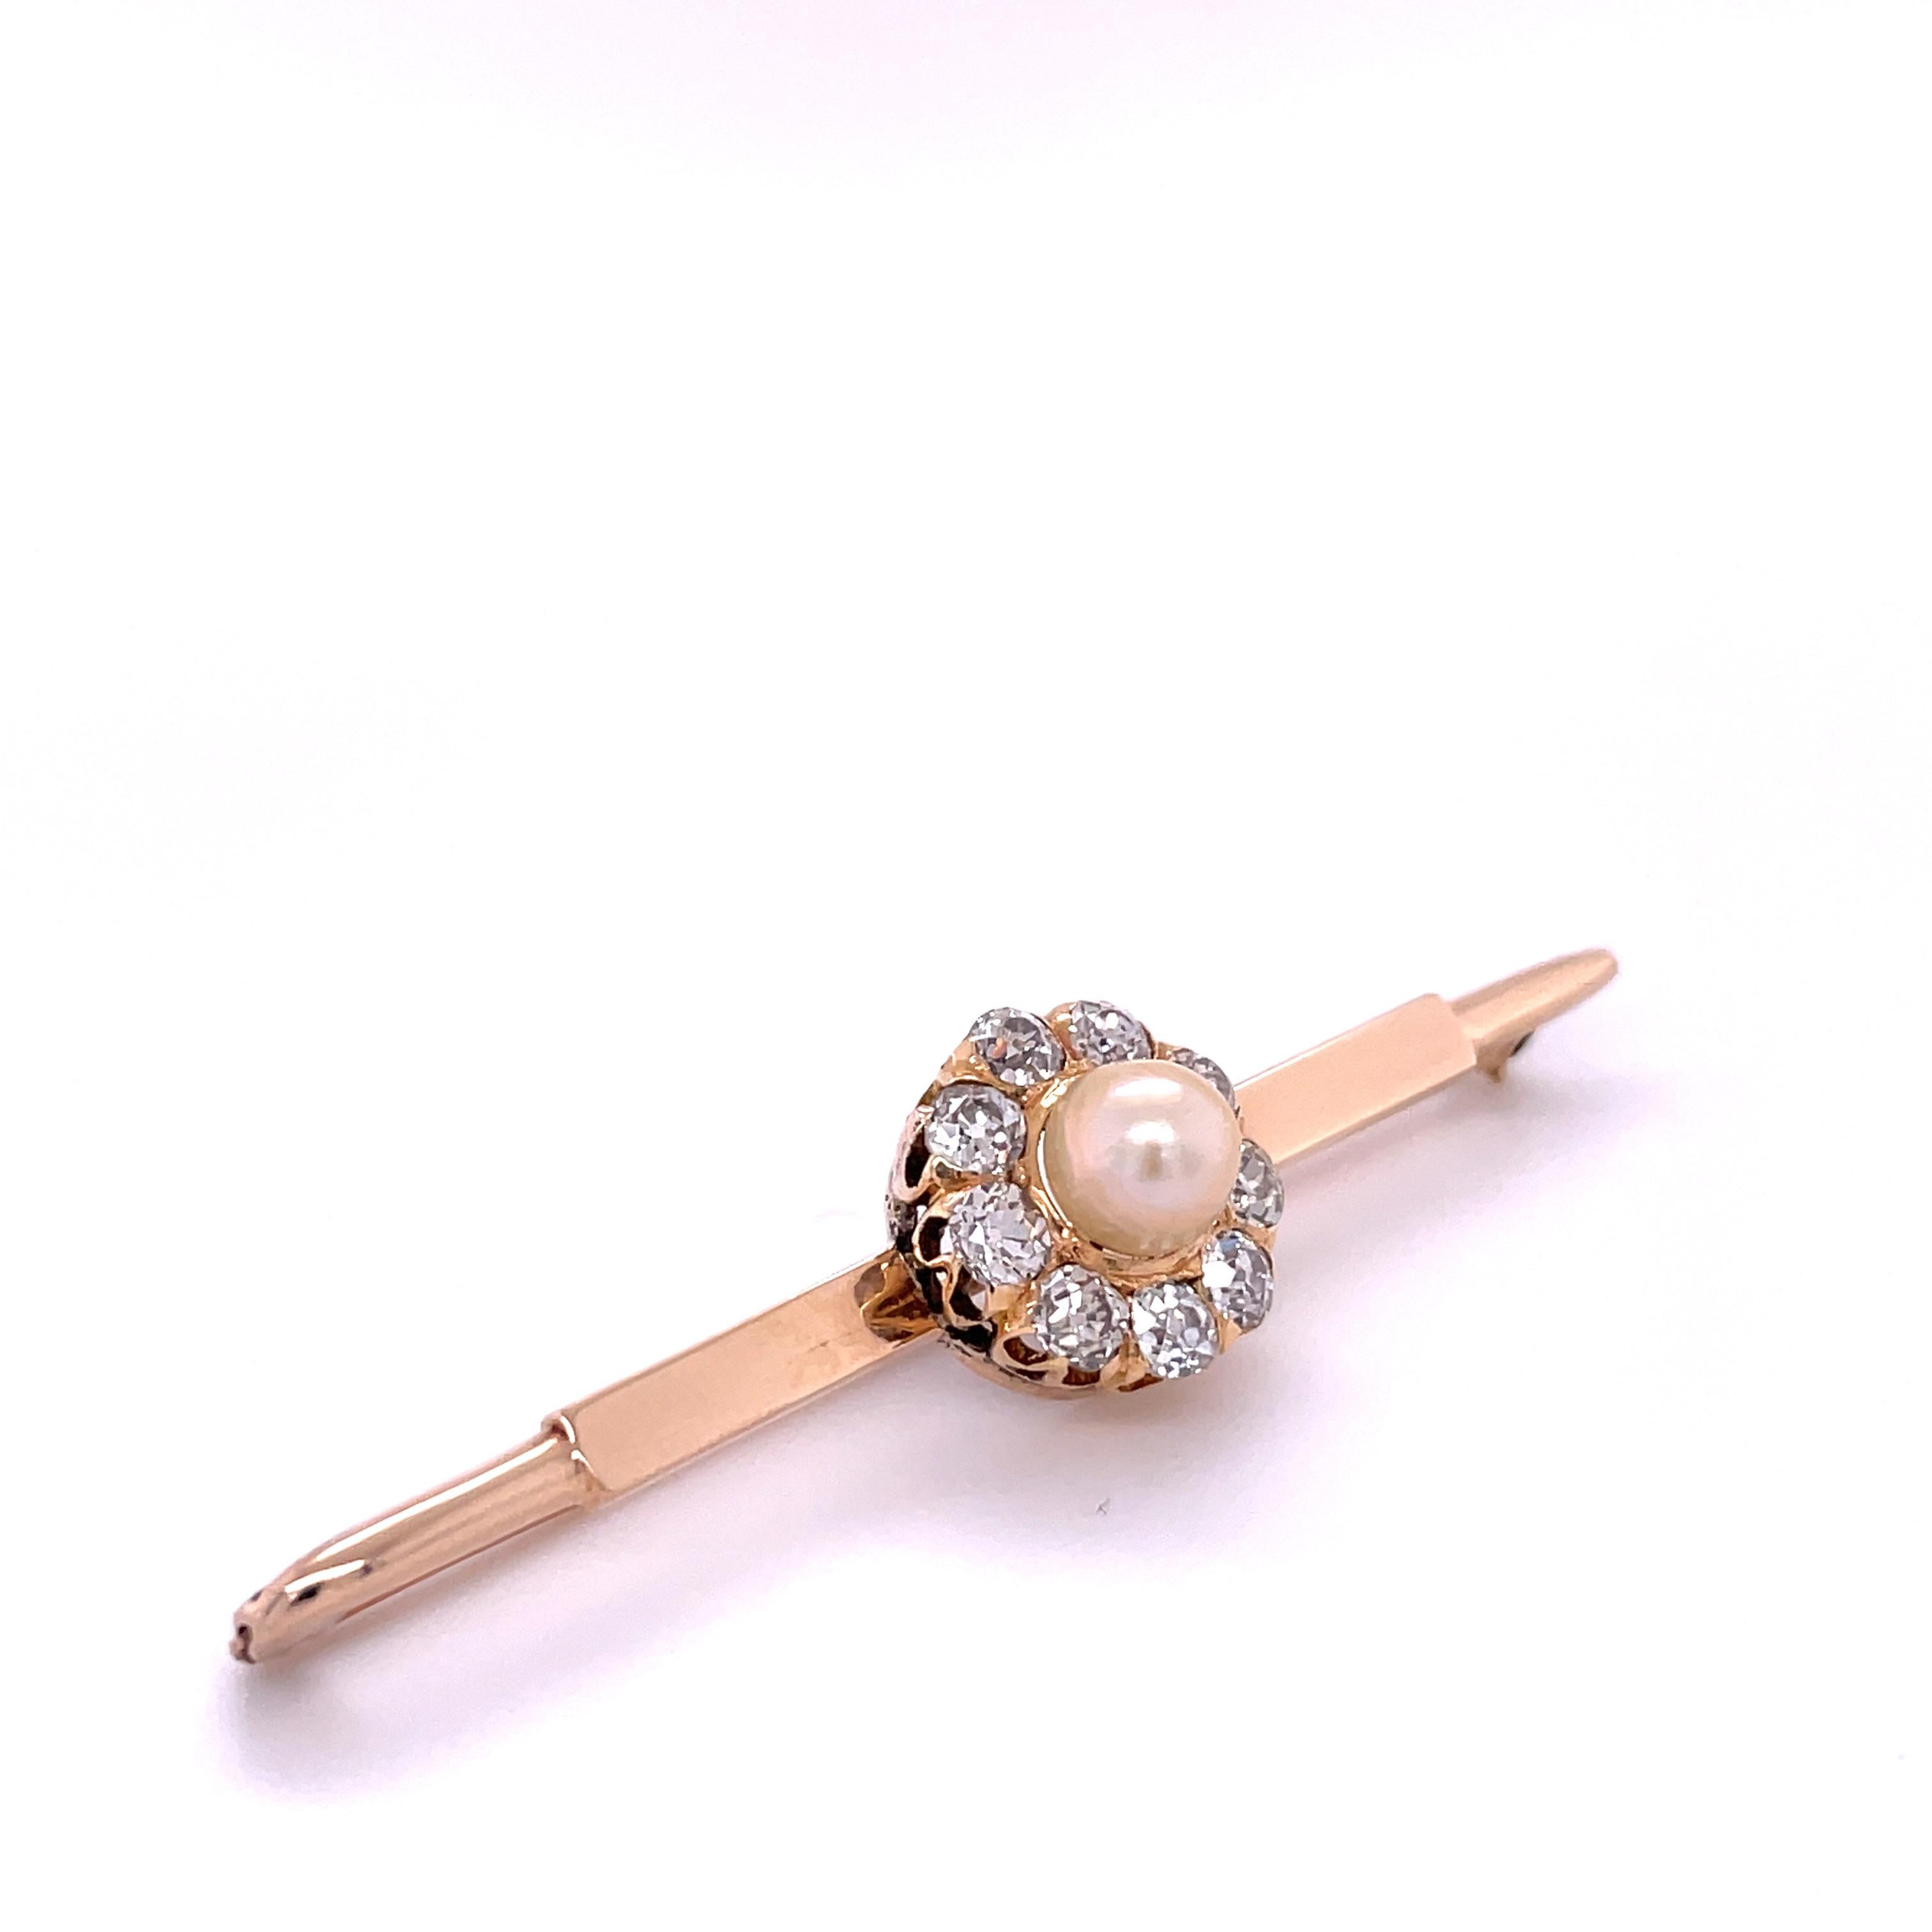 Item Details: 
Metal Type: 14k Yellow Gold  [Tested]
Weight:  5.6 grams

Diamond Details:
Weight: 1.25ct, total weight
Cut: Old European brilliant
Color: G-H
Clarity: VS/SI

Pearl: Natural, .75ct

Measurement: 2.25 inches long total
Condition: 